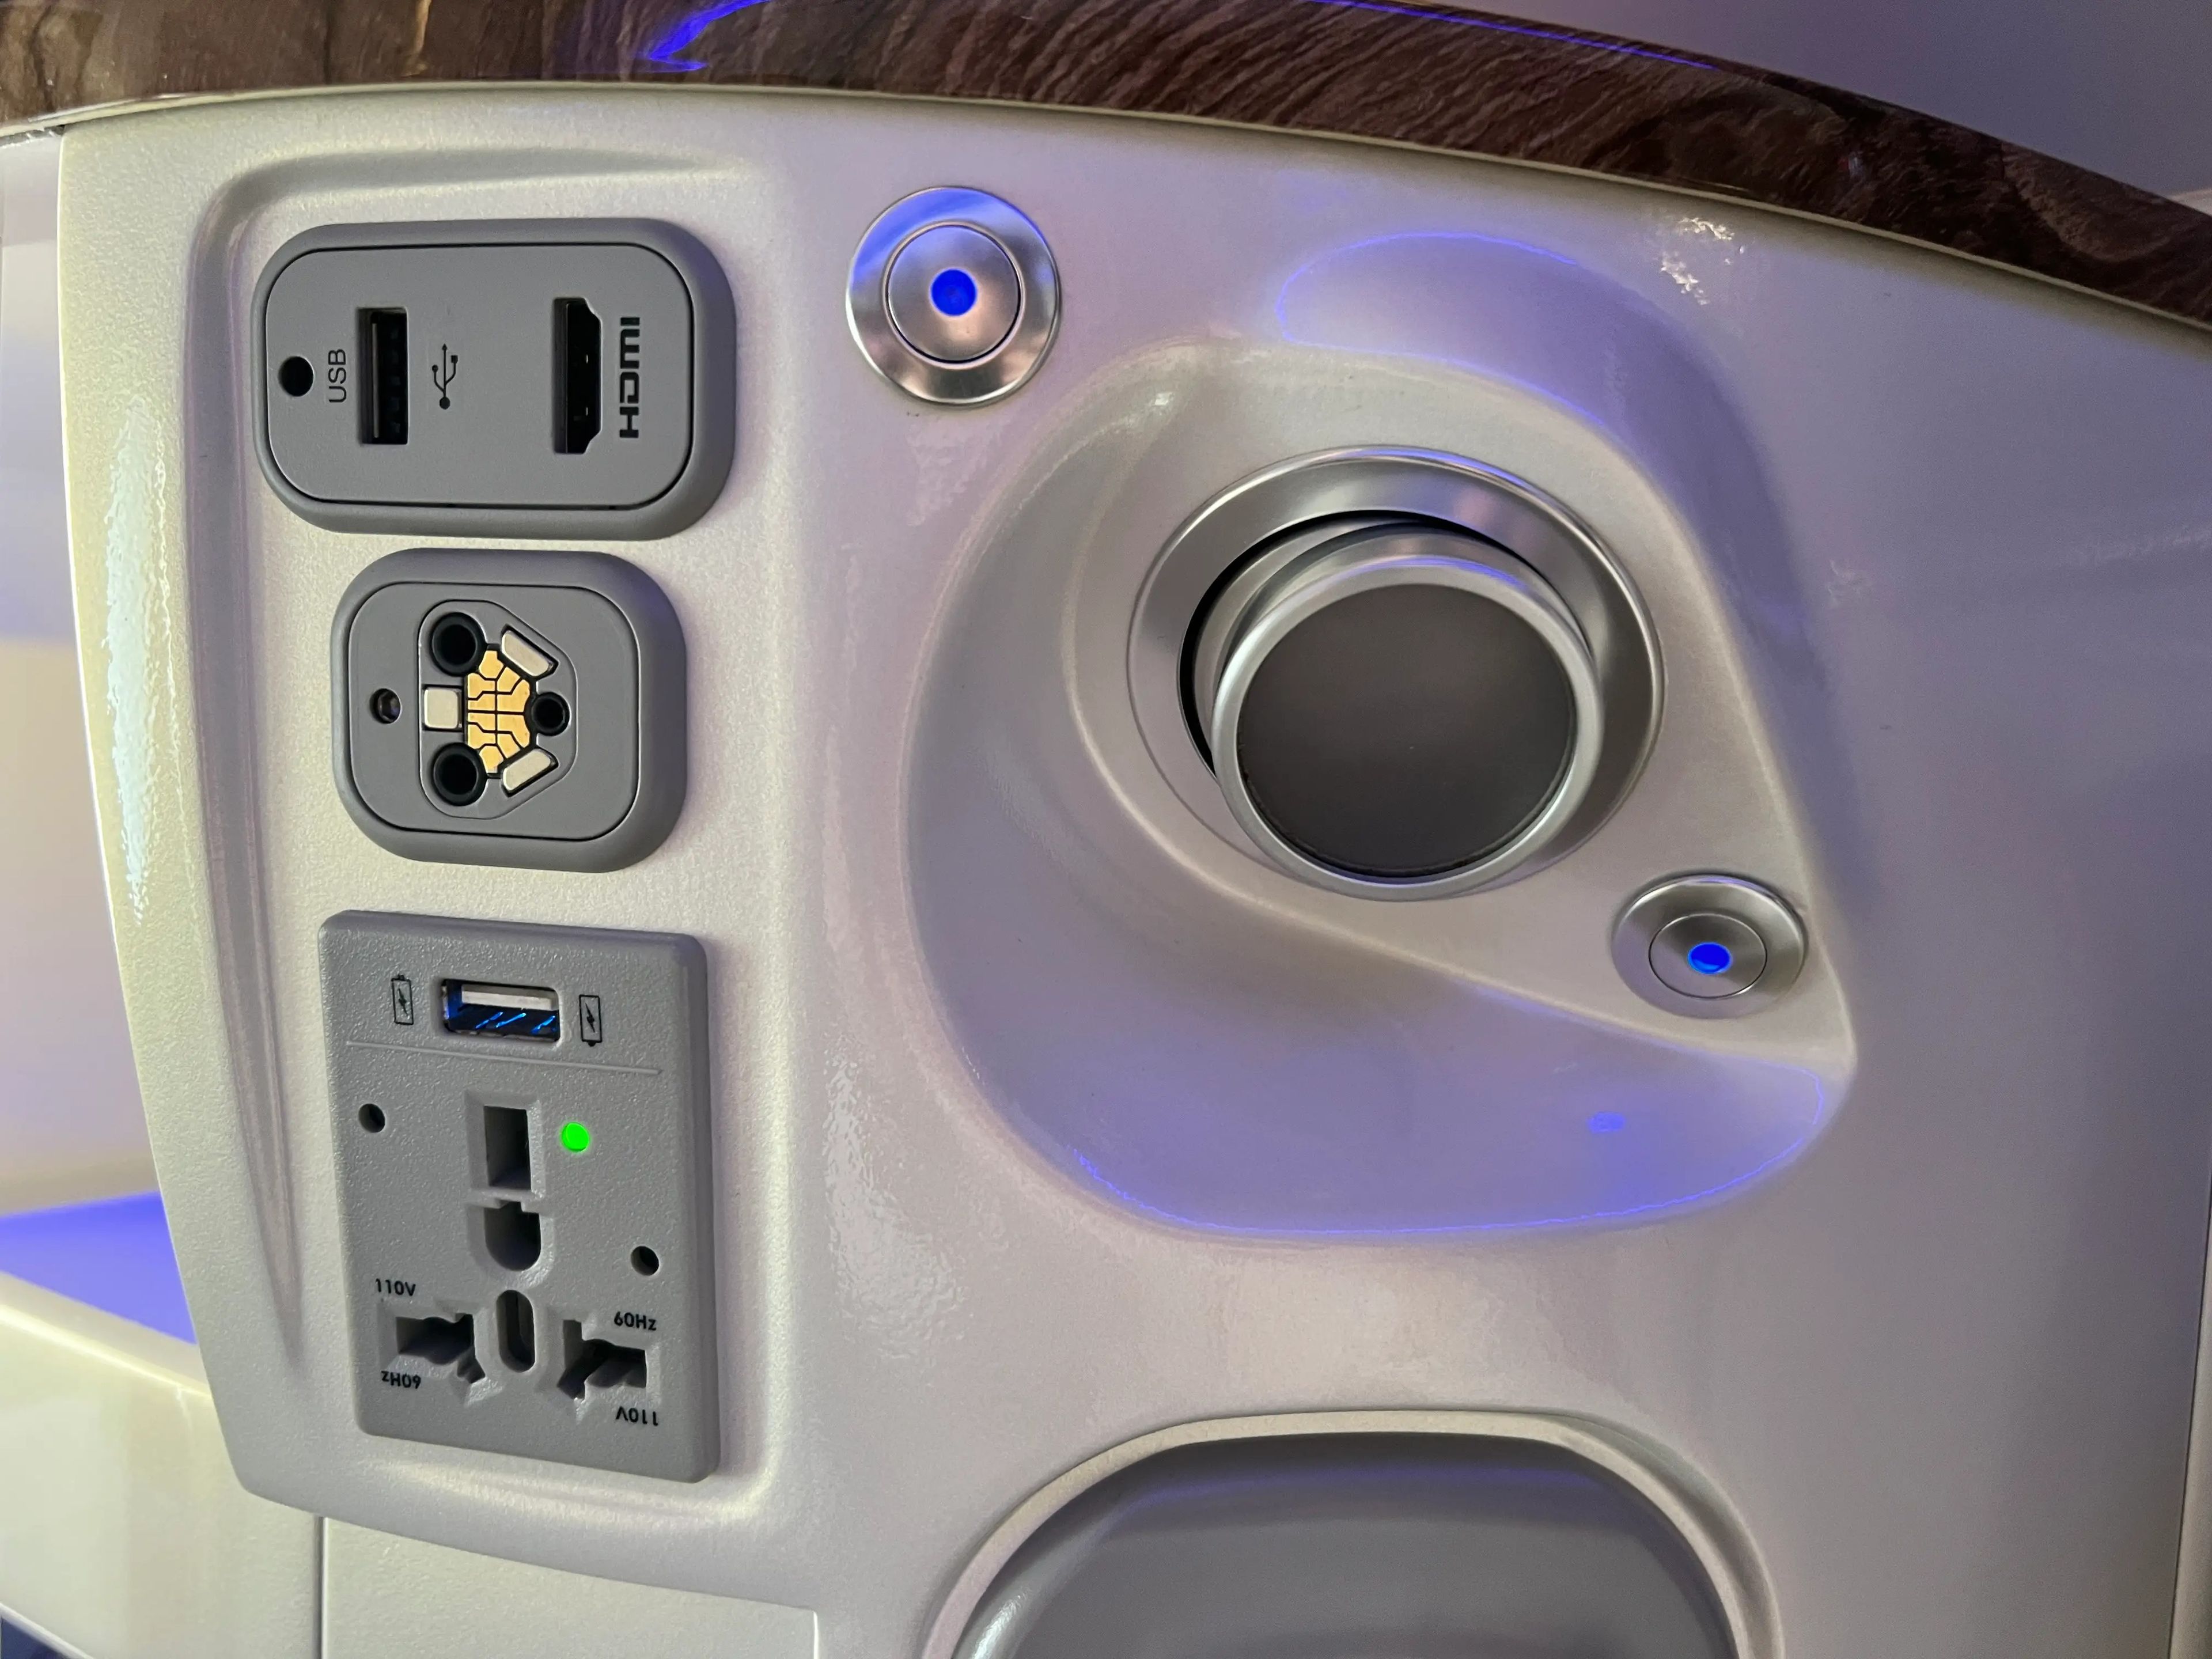 Plug and USB sockets and an air condition unit are seen on the console of a business class seat on Emirates A380